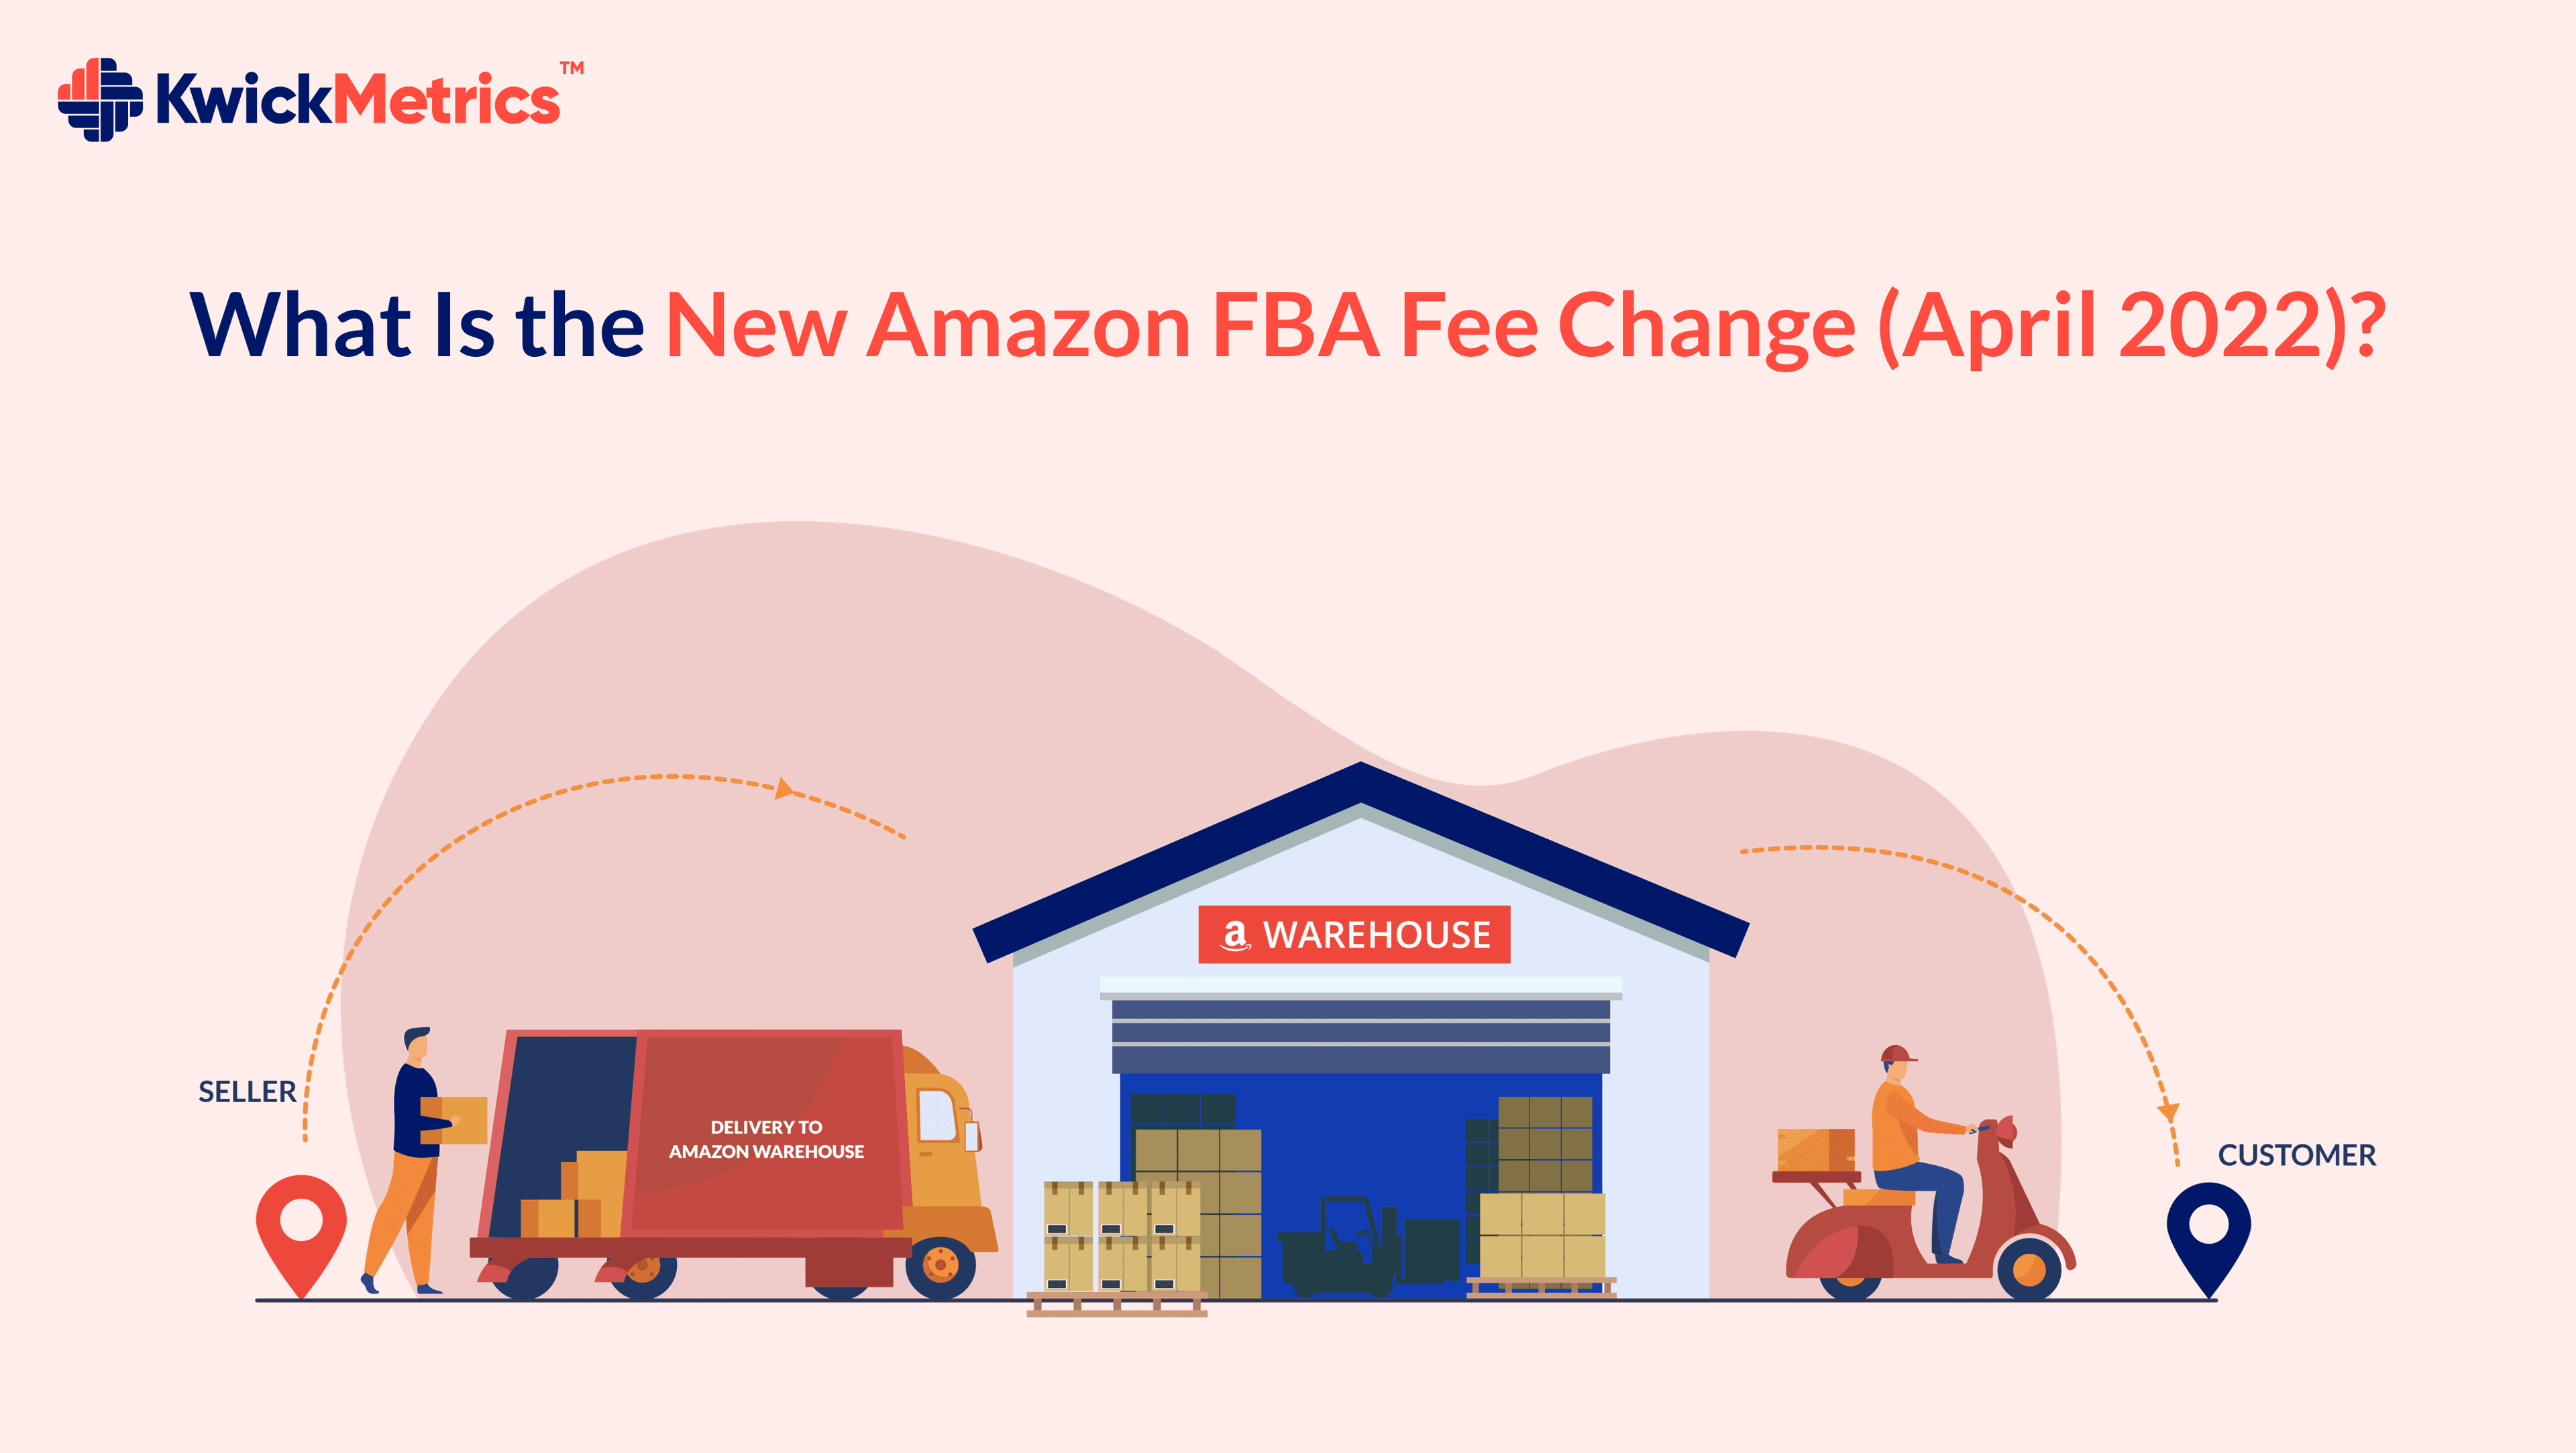 What Is the New Amazon FBA Fee Change (April 2022)?